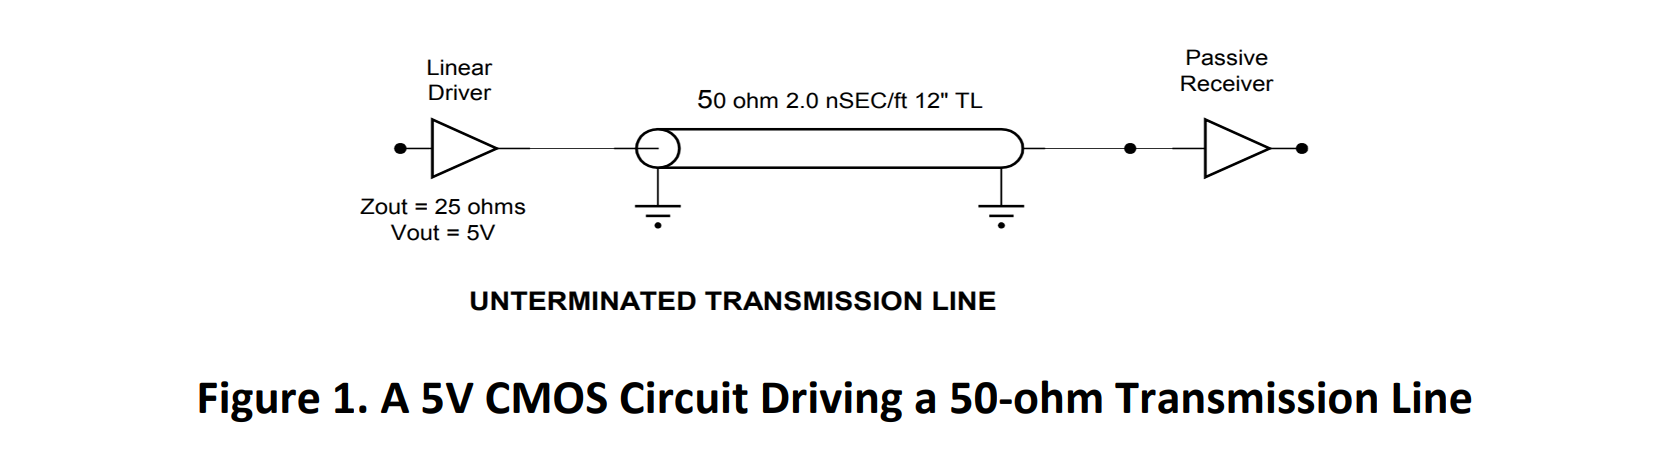 Figure 1. A linear divider connected to an unterminated transmission line connected to a passive receiver